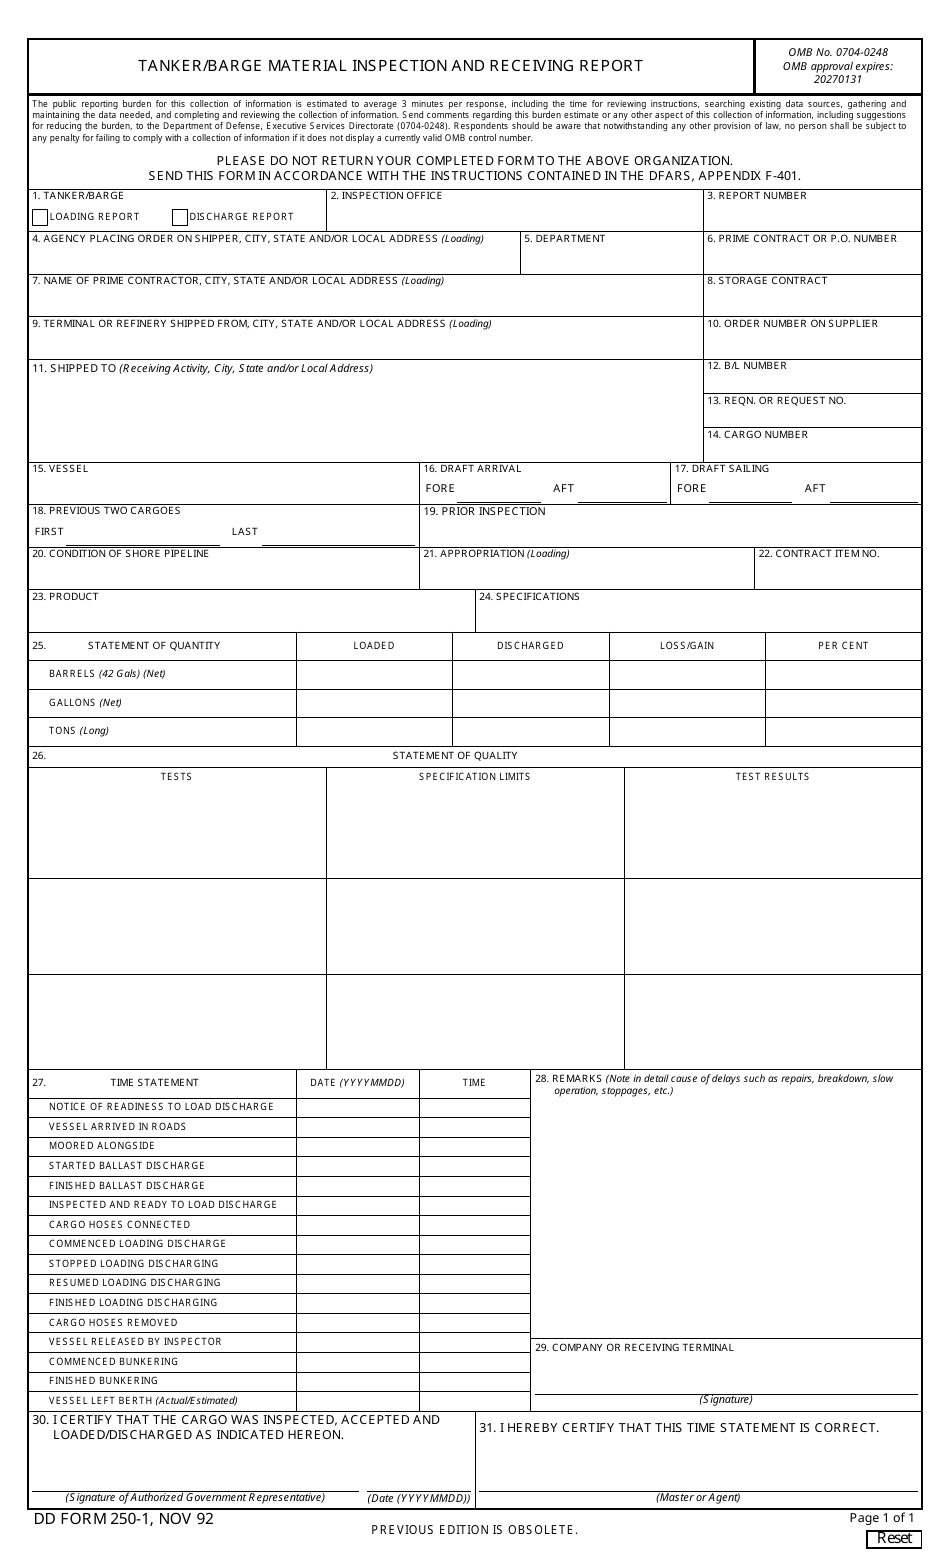 DD Form 250-1 Tanker / Barge Material Inspection and Receiving Report, Page 1